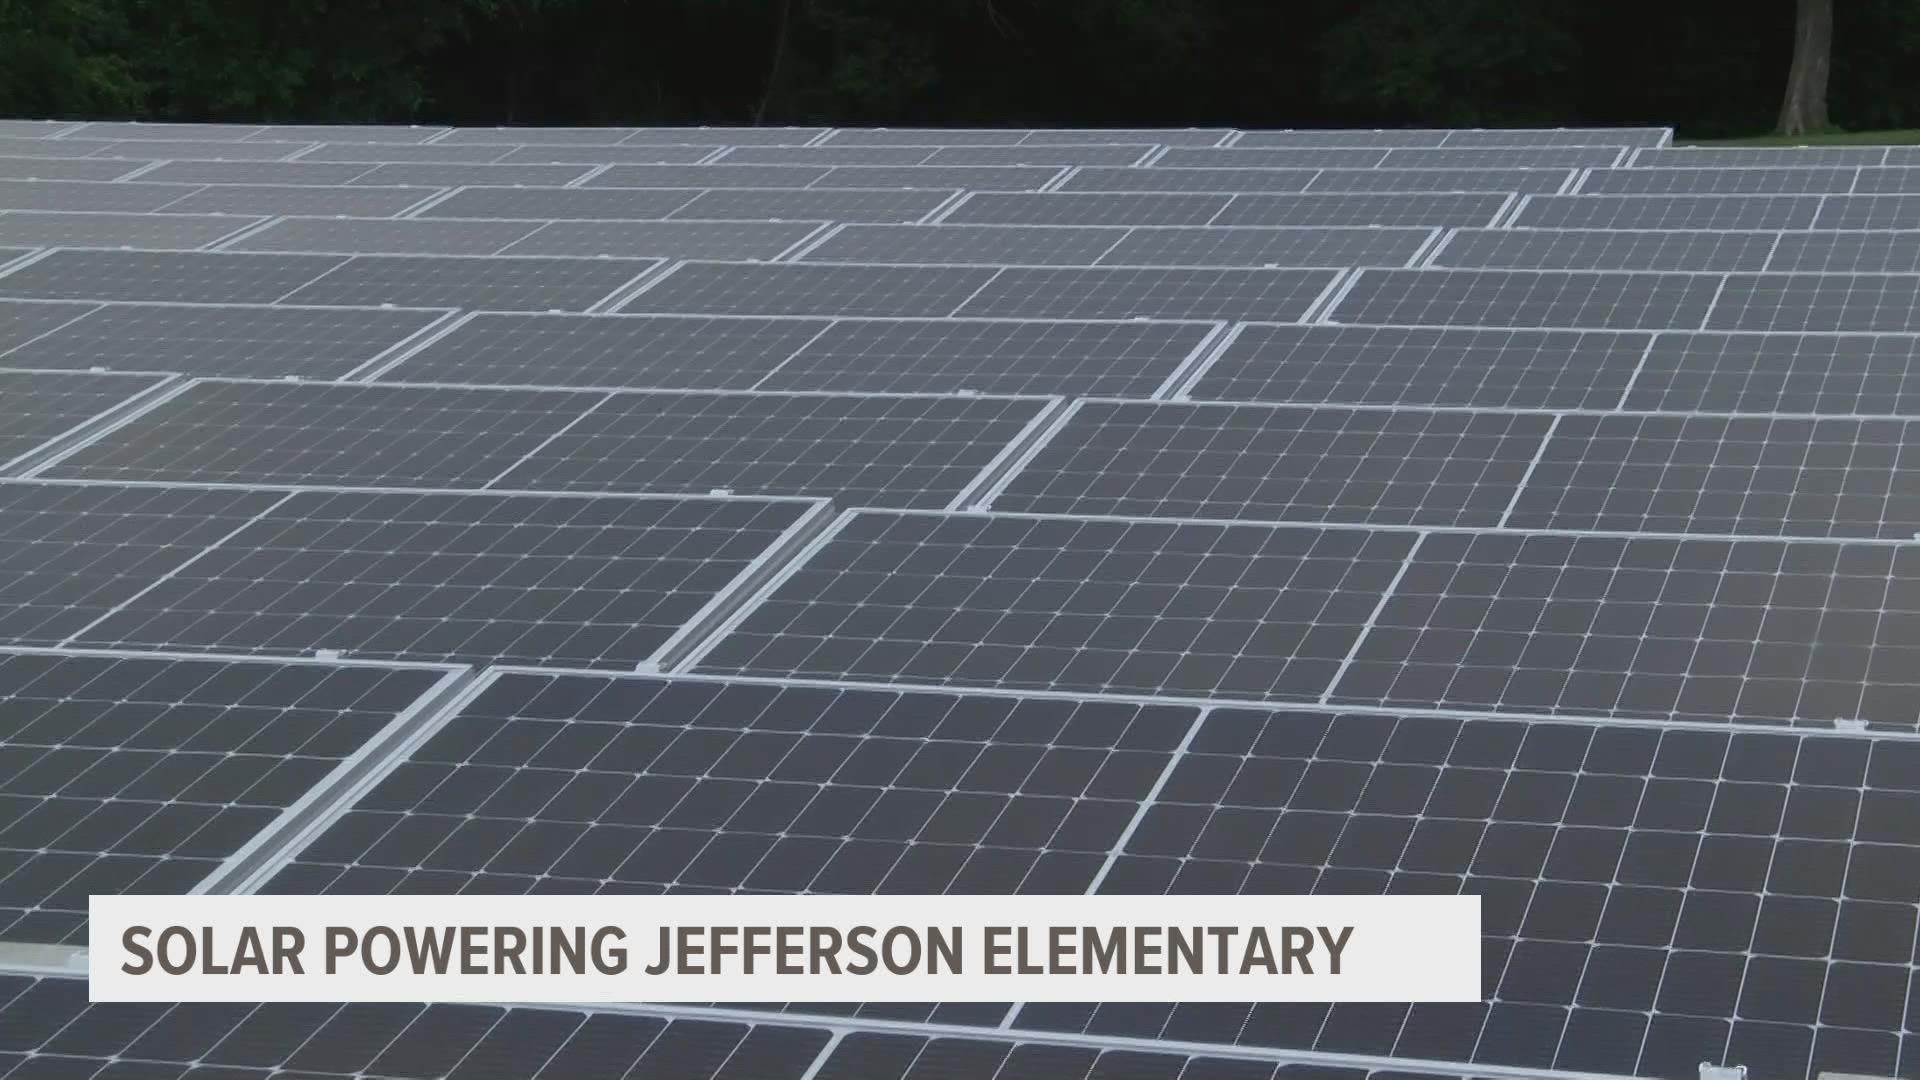 The school district installed more than 600 solar panels on the roof of the school over the summer to offset 70% of energy costs.